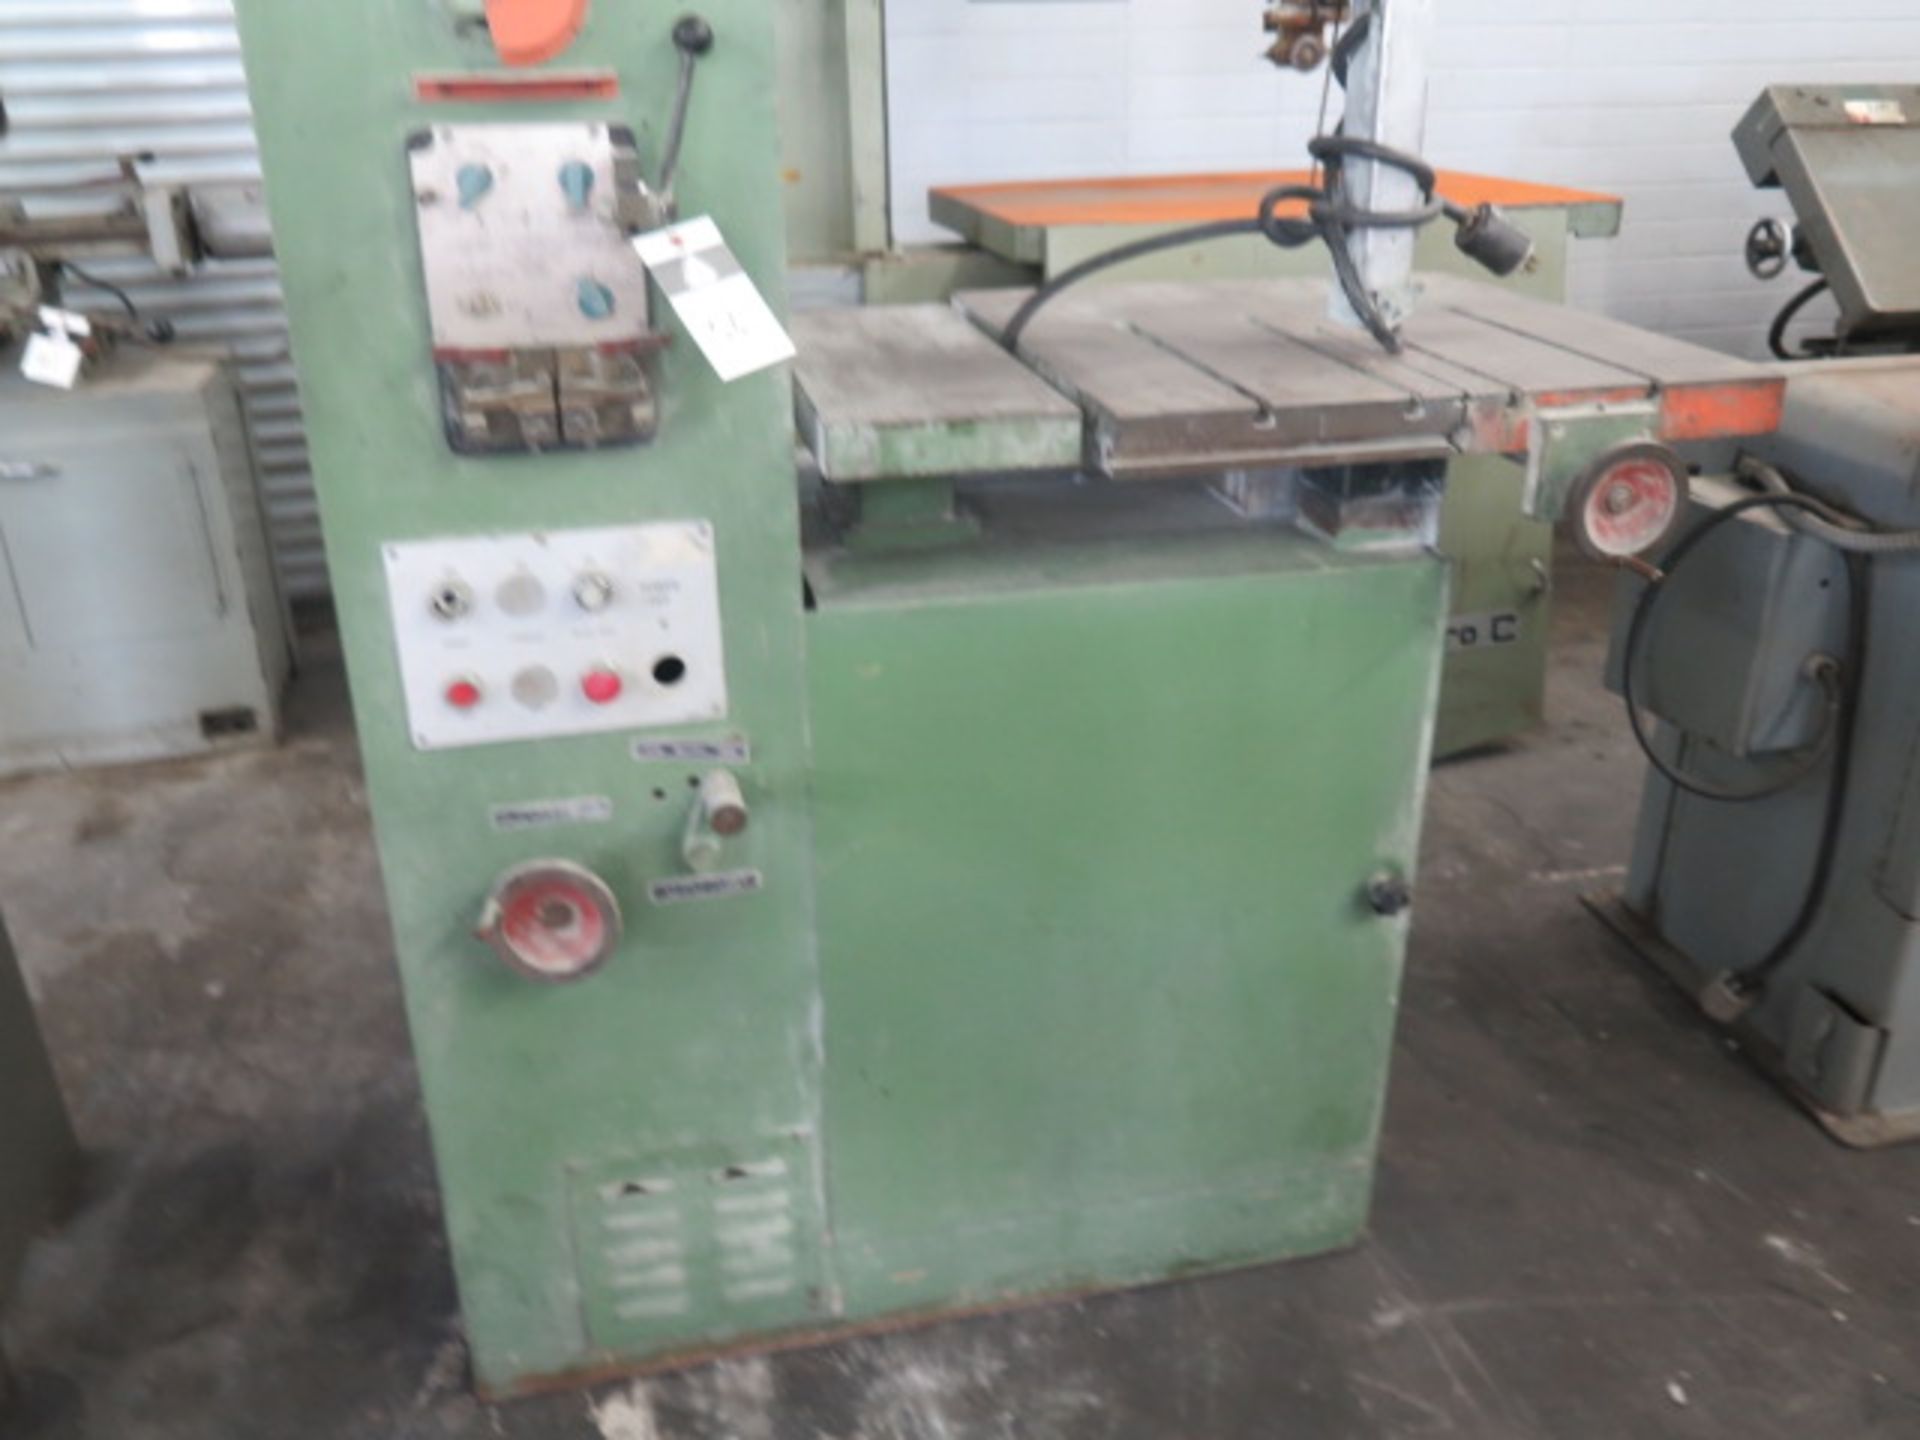 Dake-Johnson mdl. V-24 24” Vertical Band Saw w/ Blade Welder, 26” x 26” Table (SOLD AS-IS - NO - Image 4 of 10